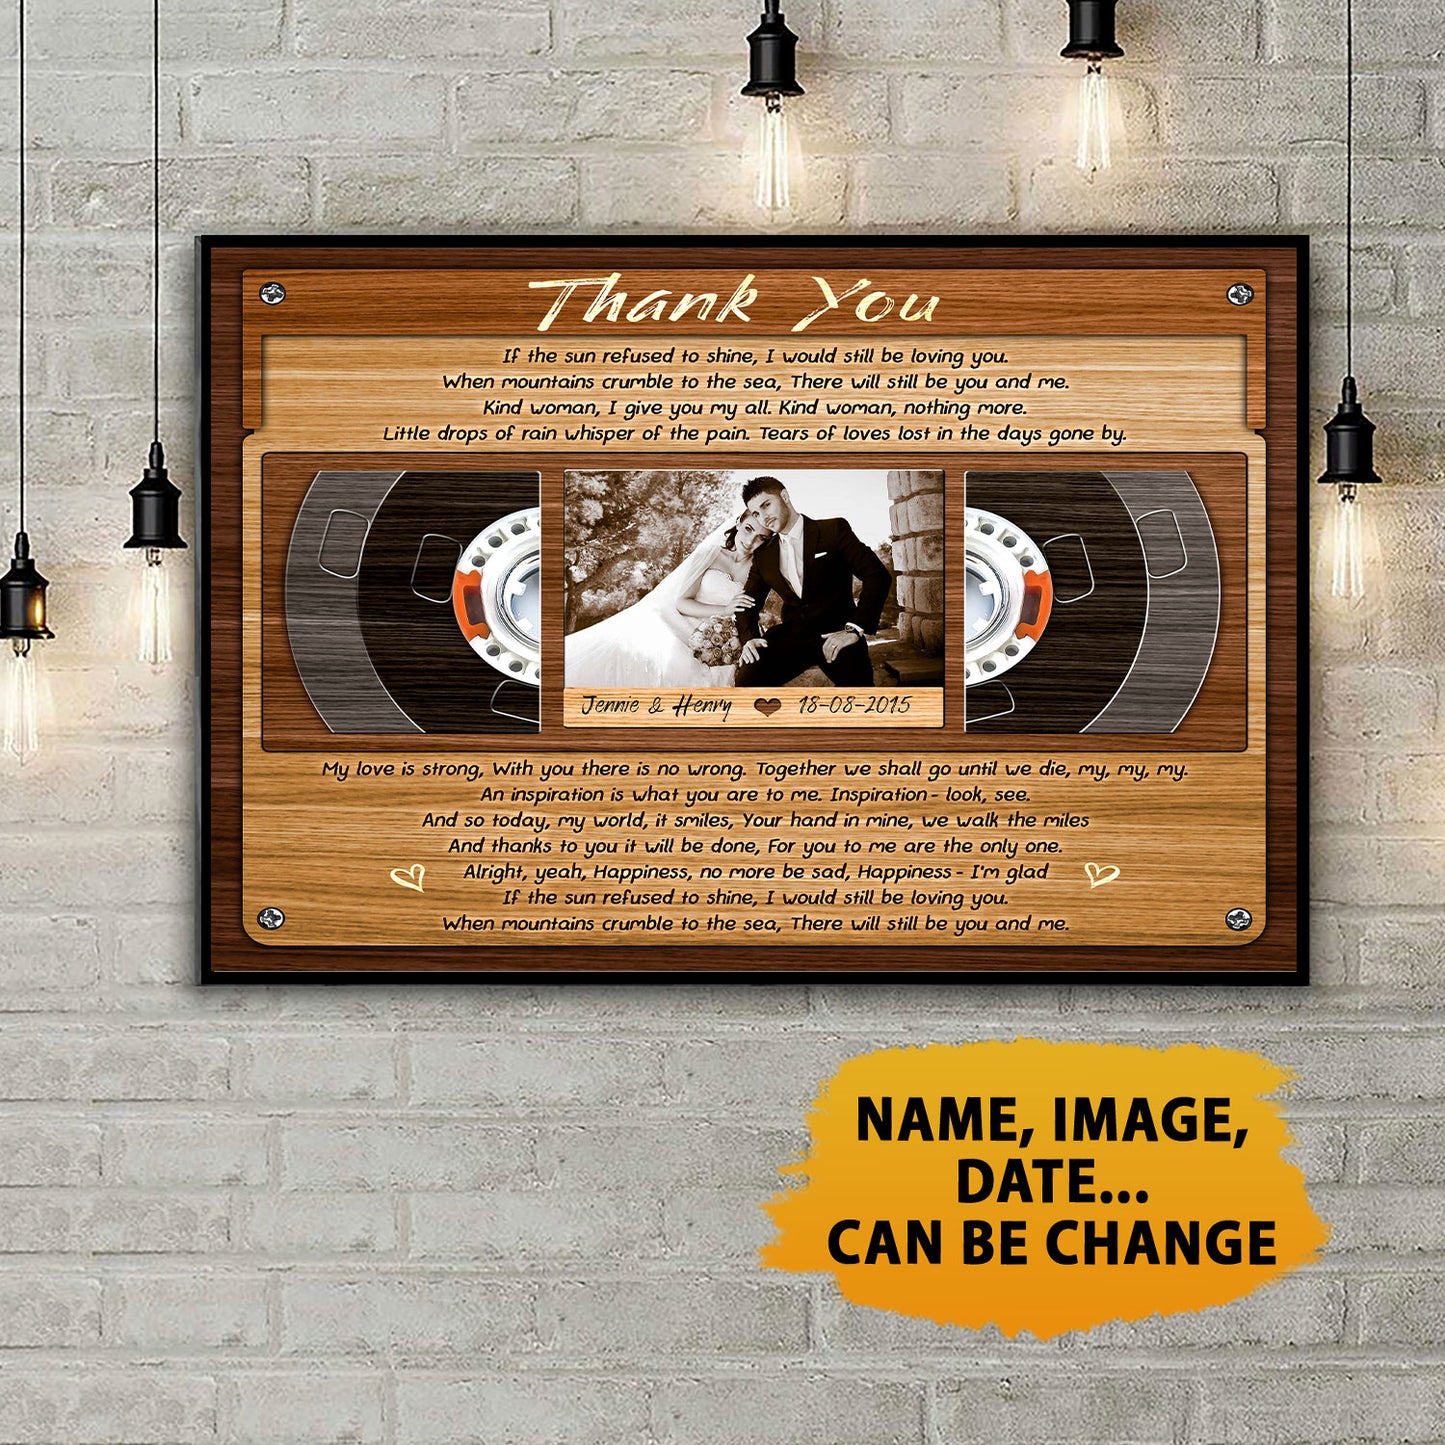 Thank You - Music Lyrics Song Anniversary Personalized Poster